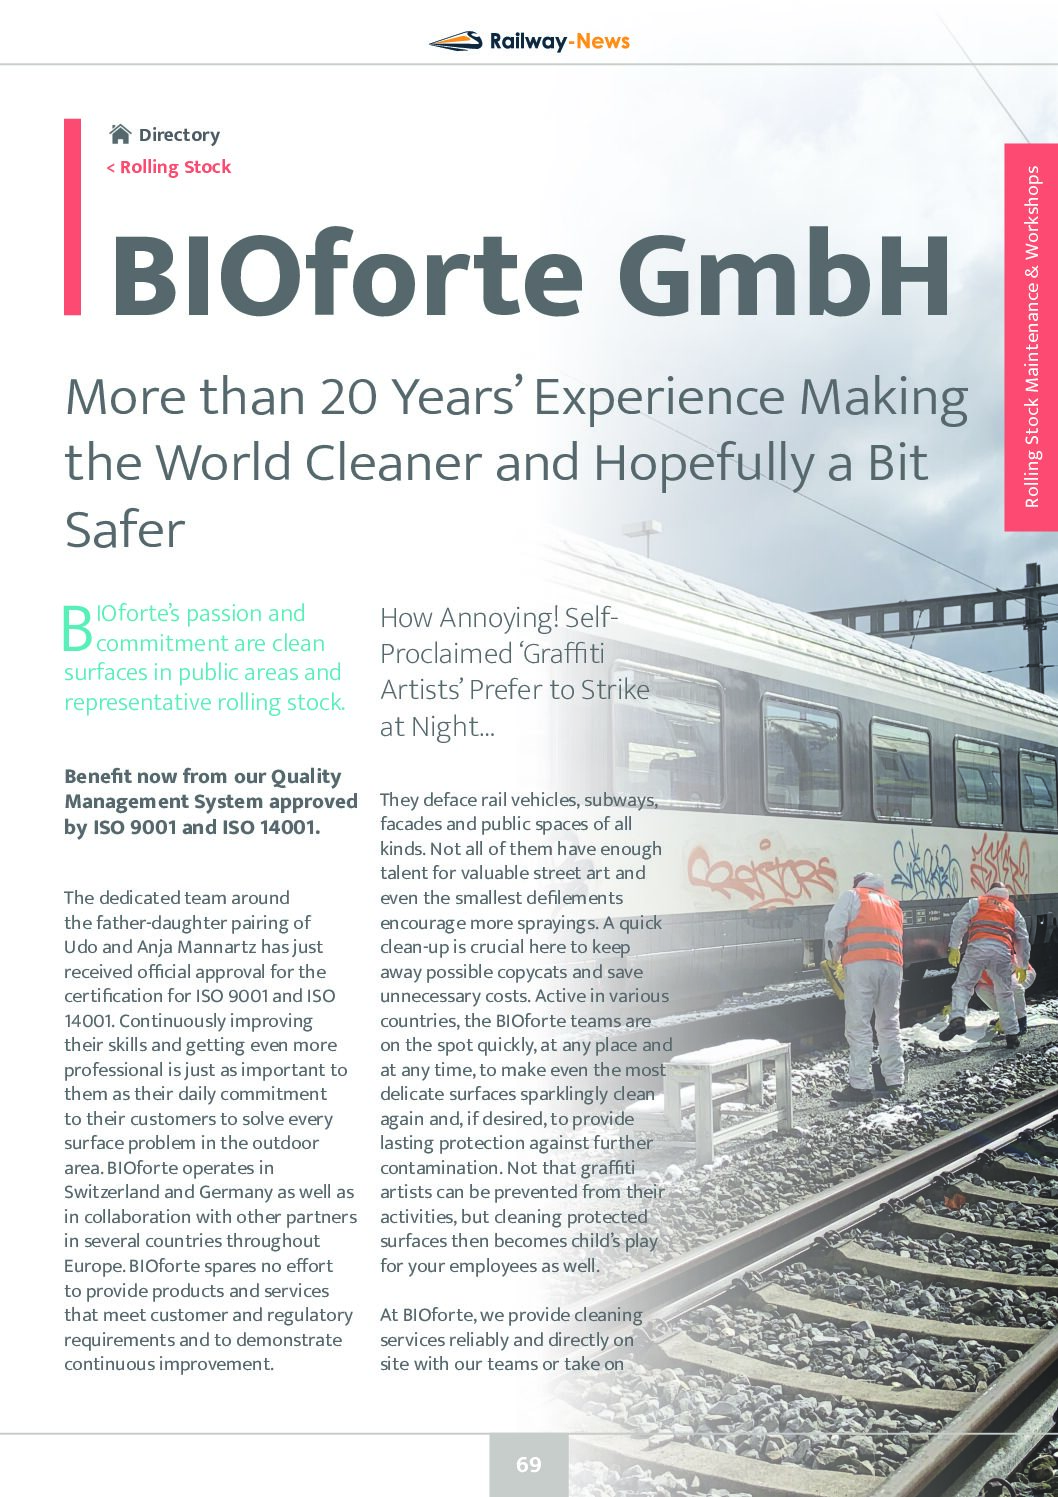 BIOforte – More than 20 Years’ Experience Making the World Cleaner